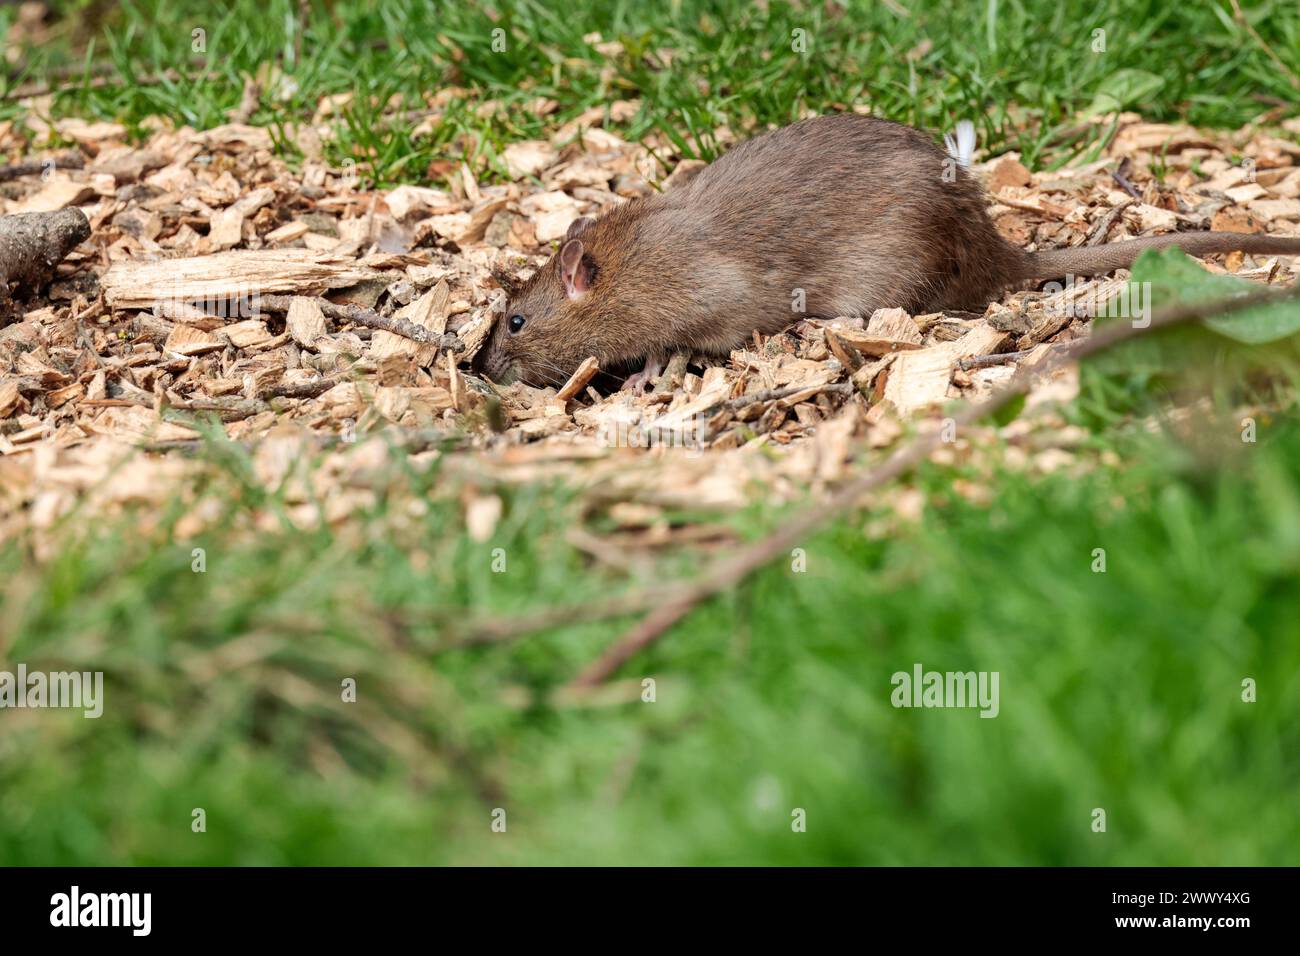 Rat brown Rattus norvegicus, under bird feeder in hide, grey brown fur long scaly tail pointed face small rounded ears pink nose and feet spring UK Stock Photo